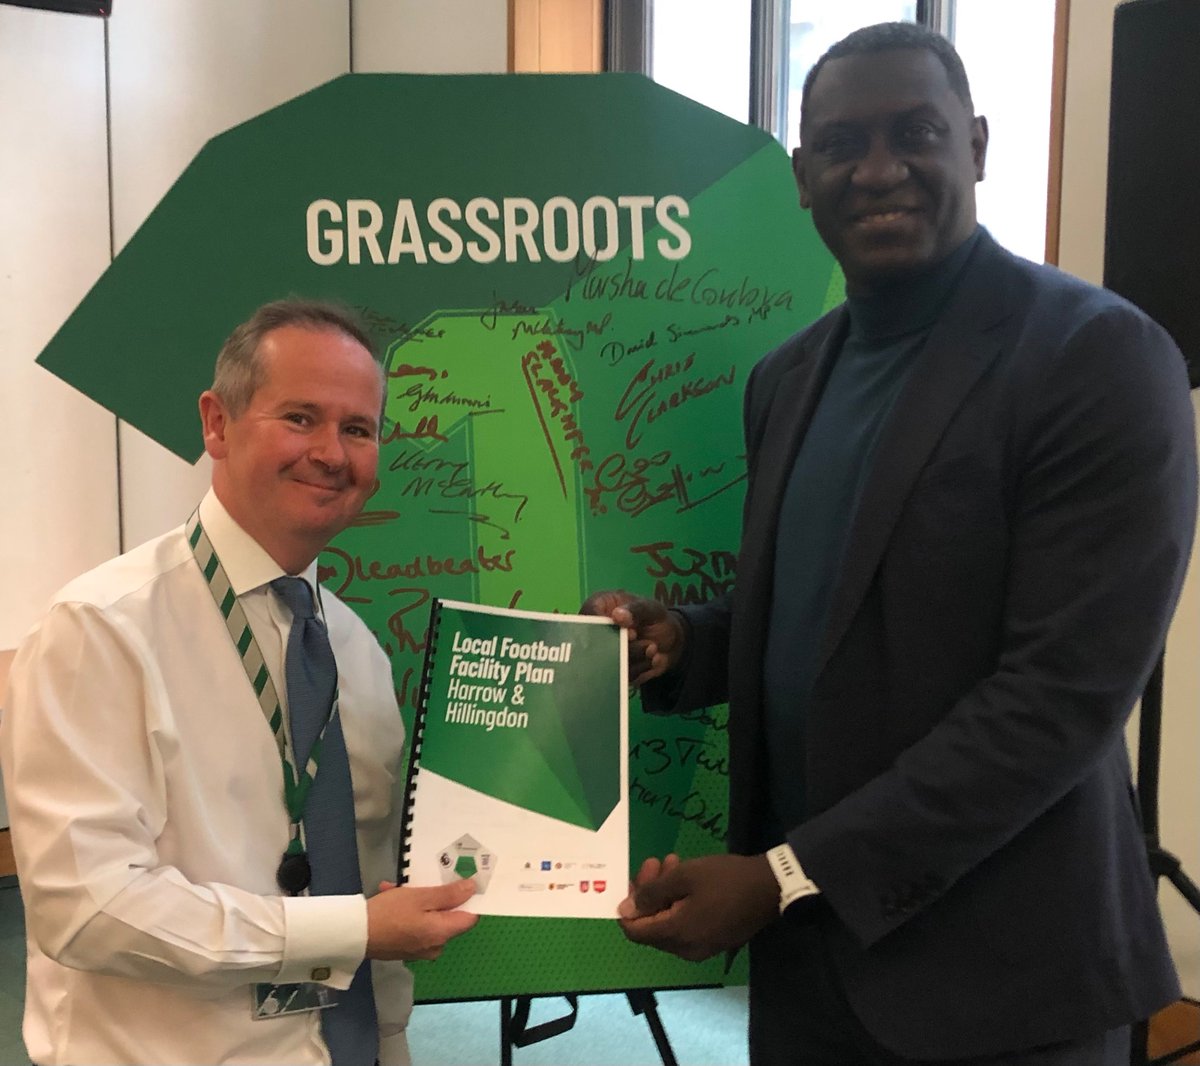 Lovely to meet @EmileHeskeyUK at the grassroots football event @UKParliament and celebrate the financial support provided to lots of our local football clubs